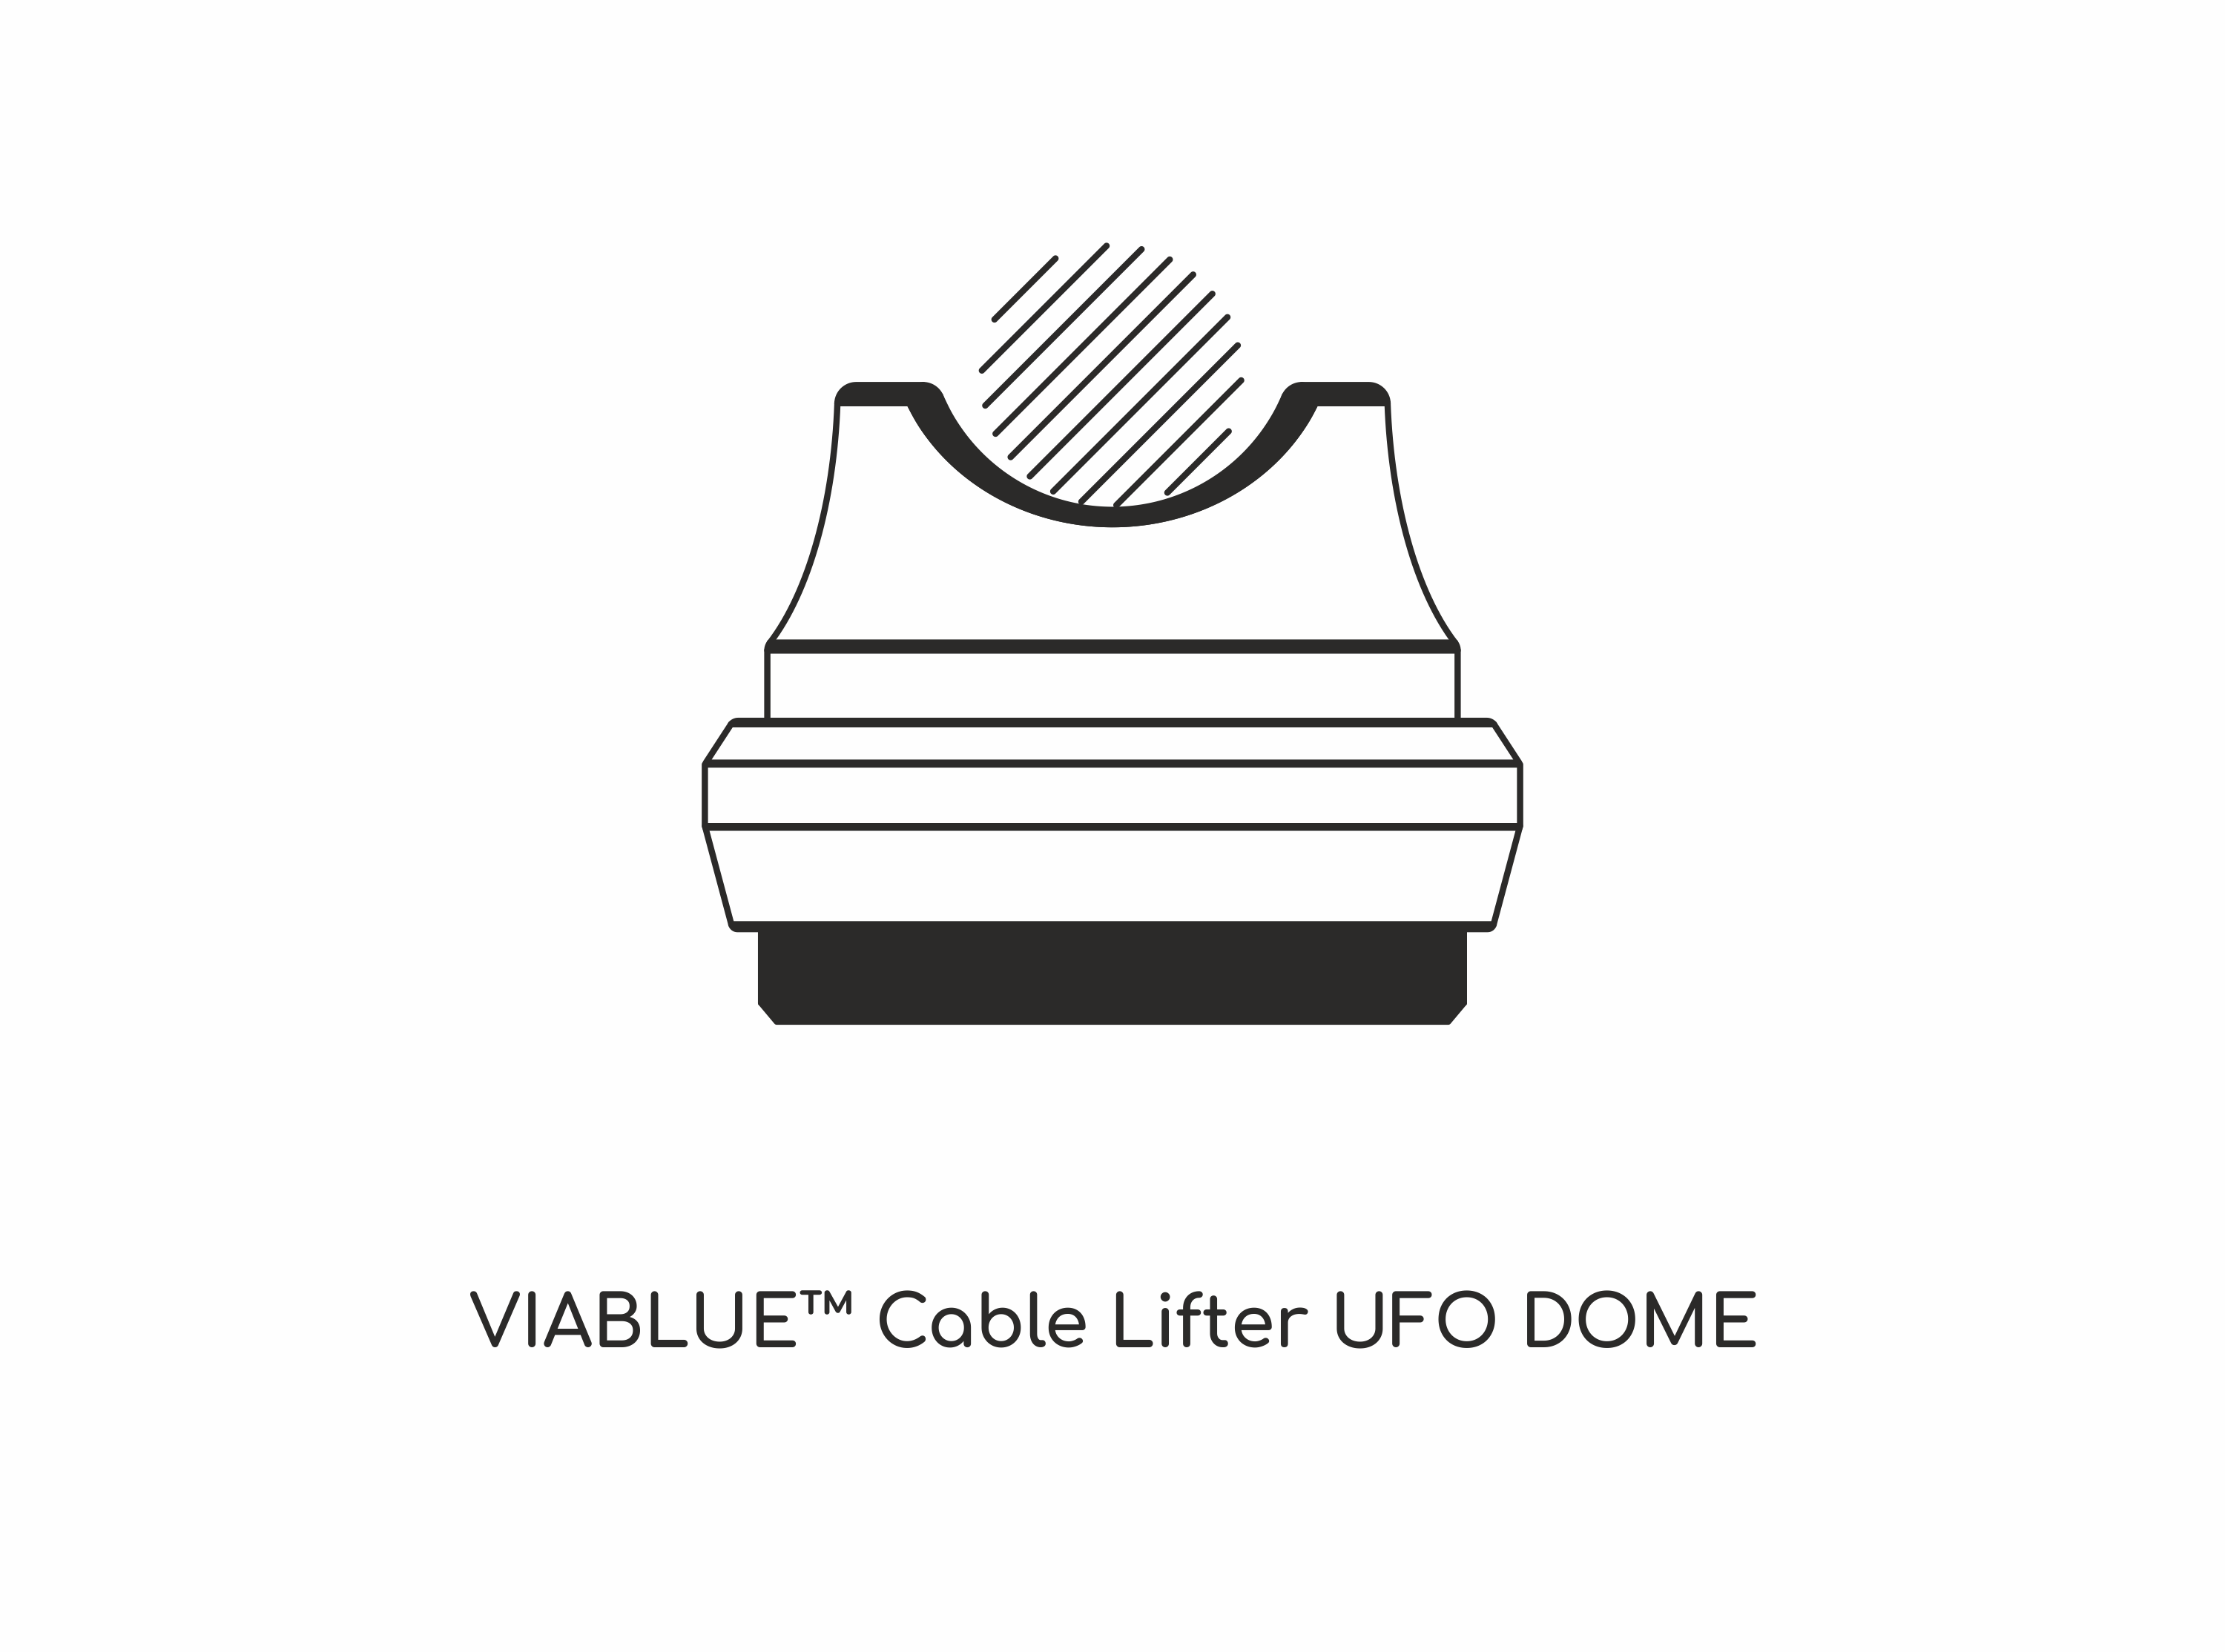 VIABLUE™ Cable Lifter Ufo Dome function